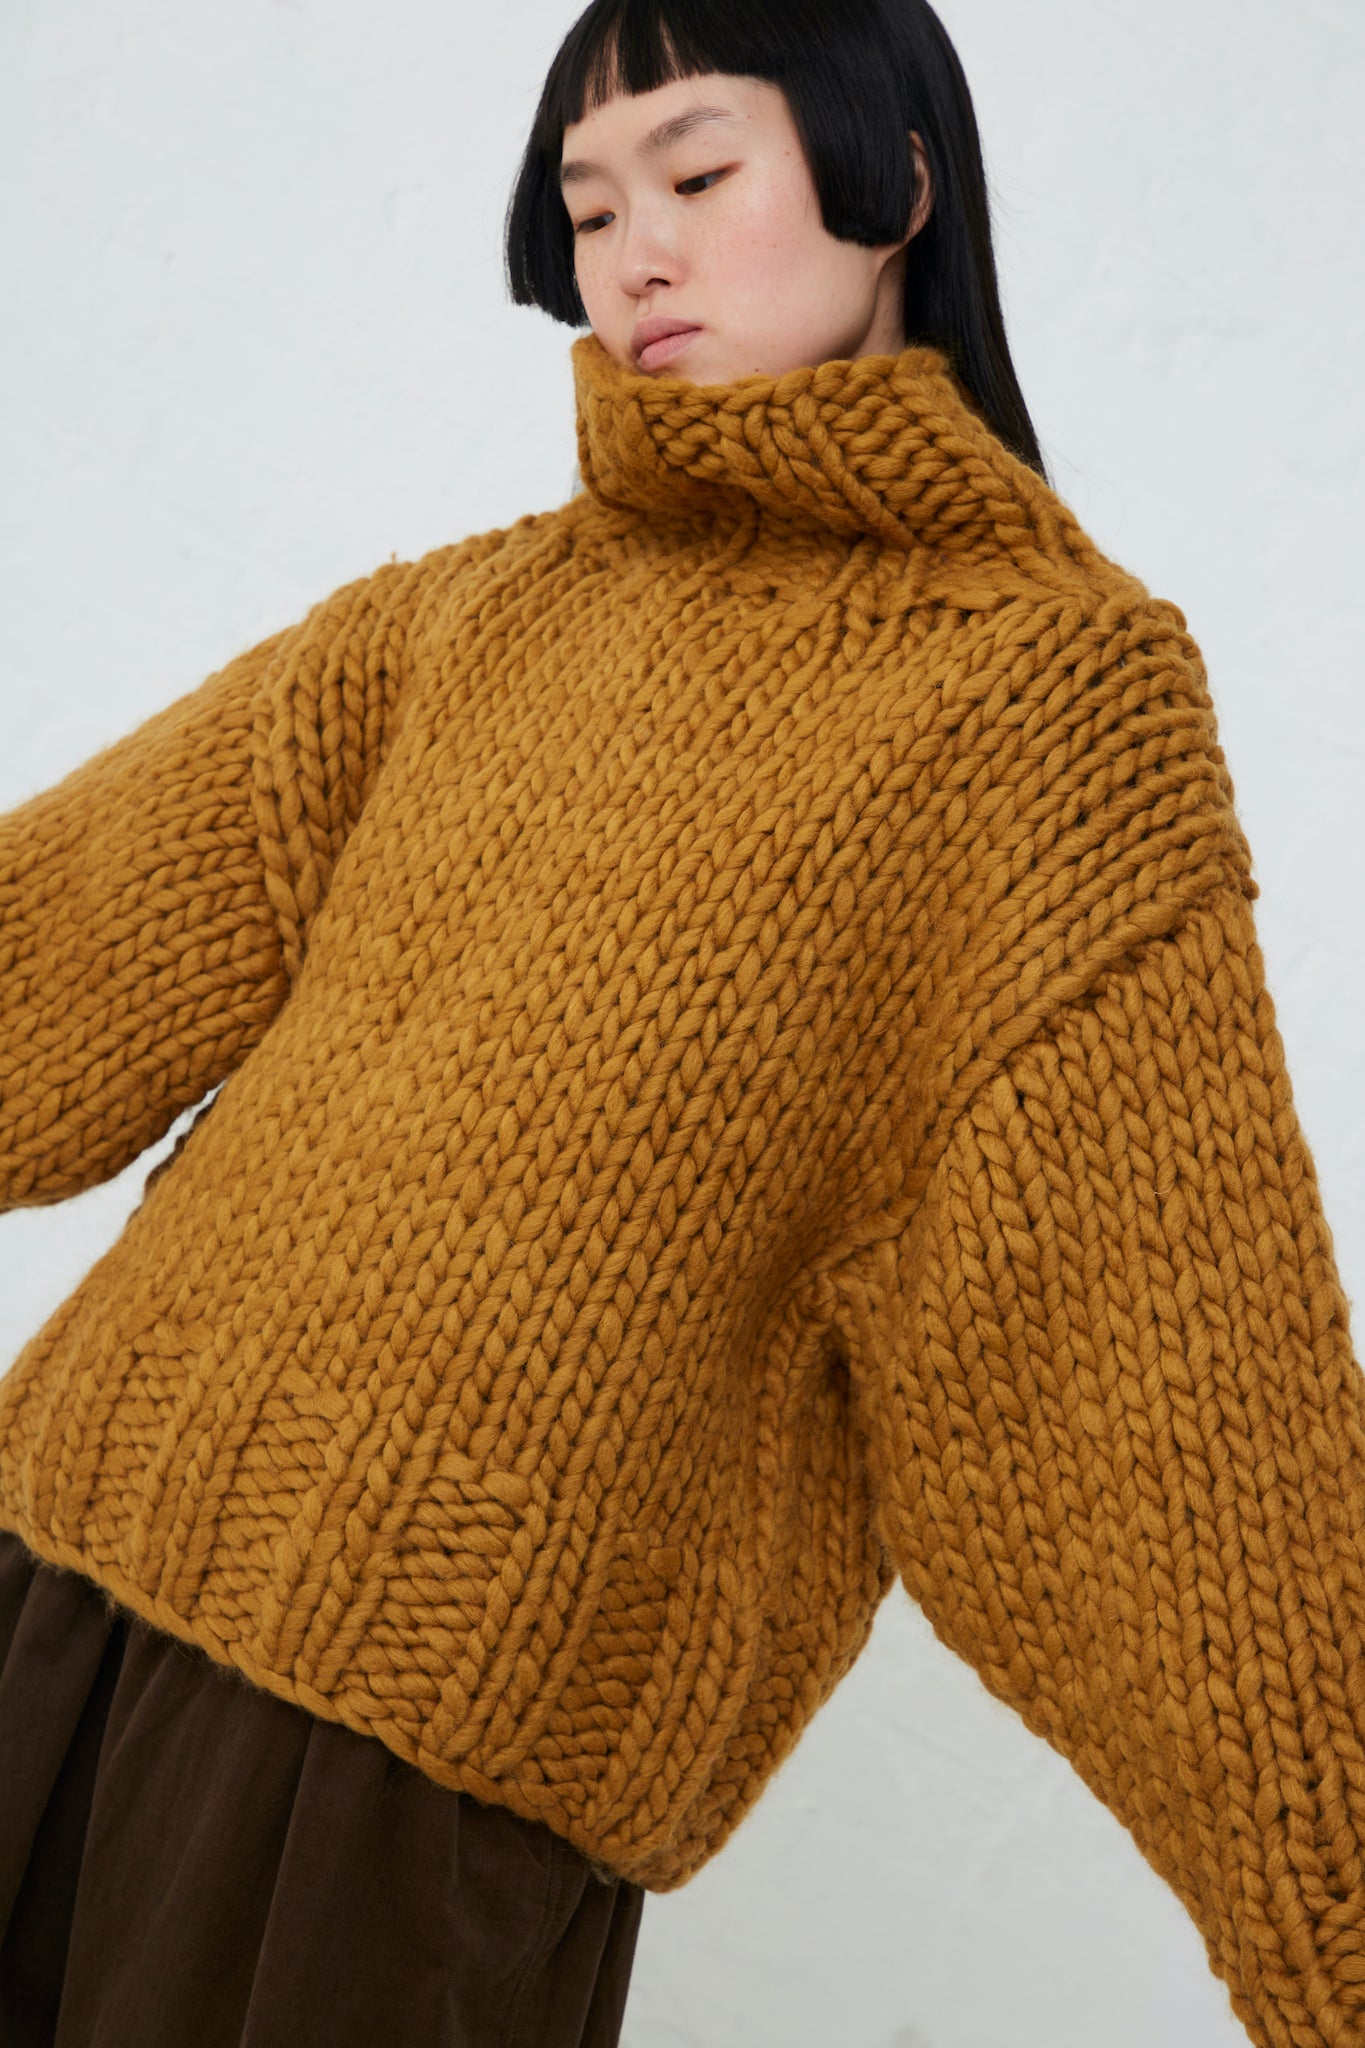 The model is wearing an Ichi wool hand-knit pullover in mustard.